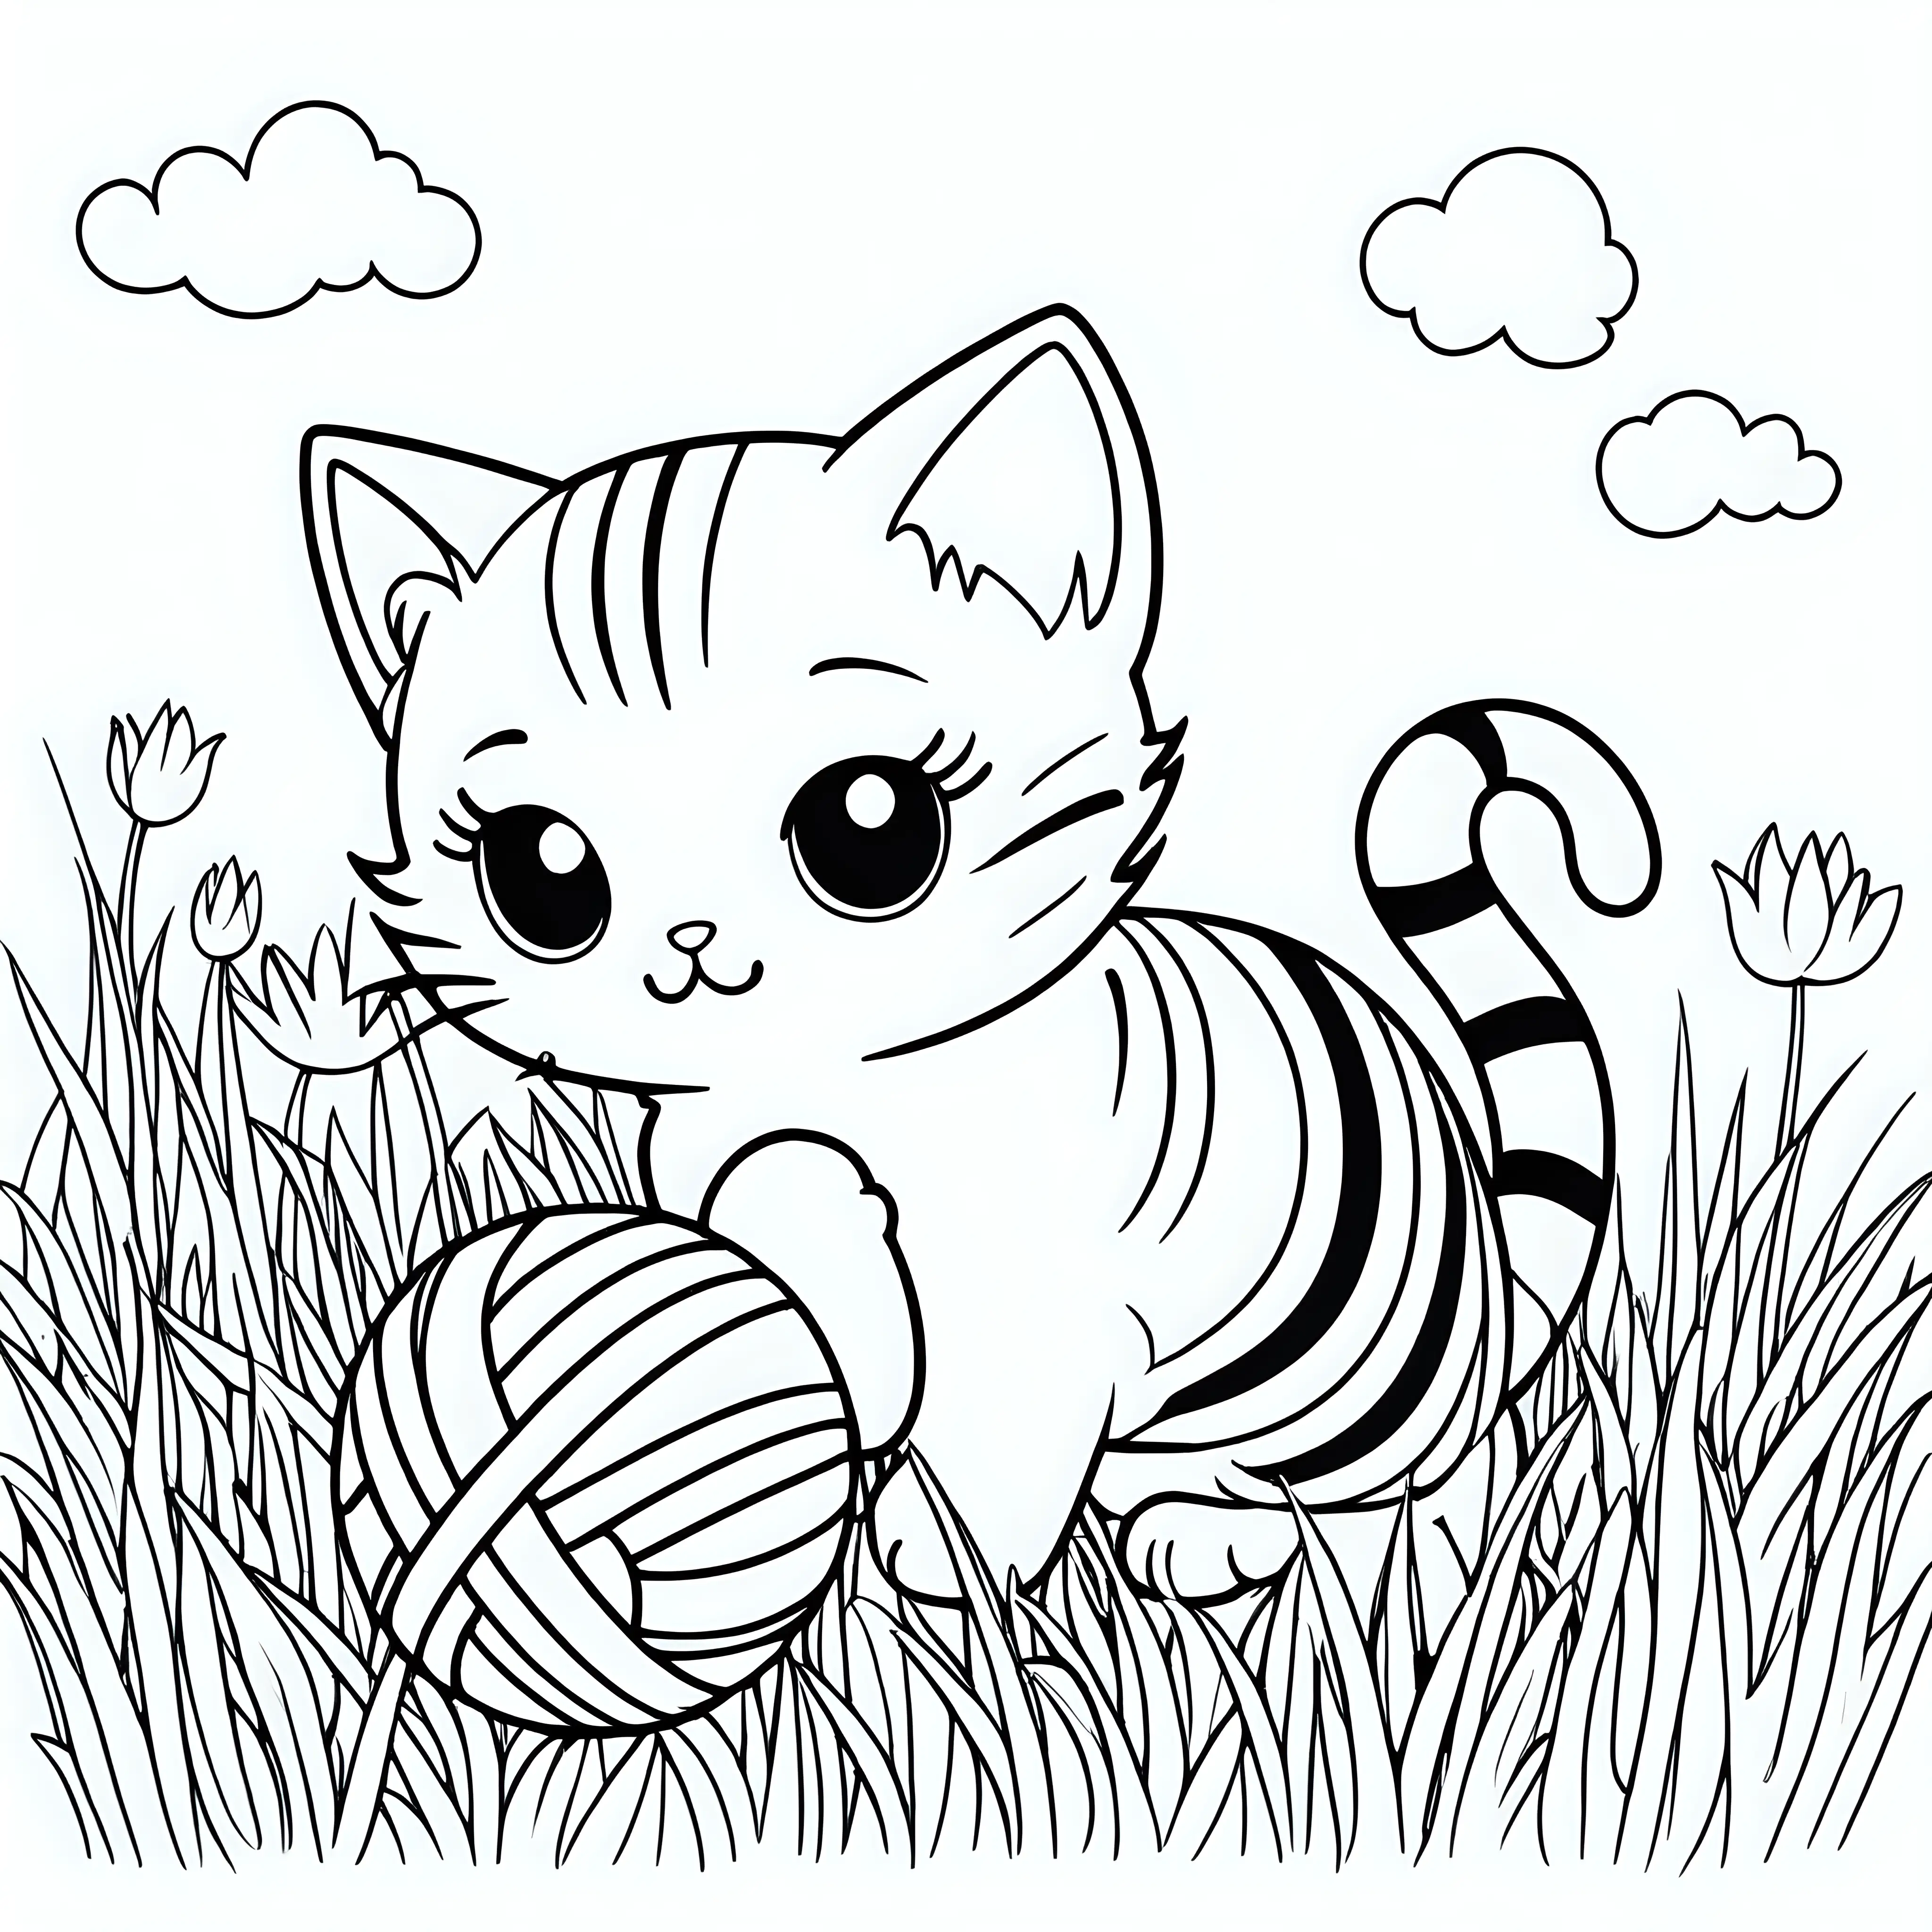 Coloring page of a cute kawaii cat  playing with a striped ball in a grass field, black lines and white background only black and white 